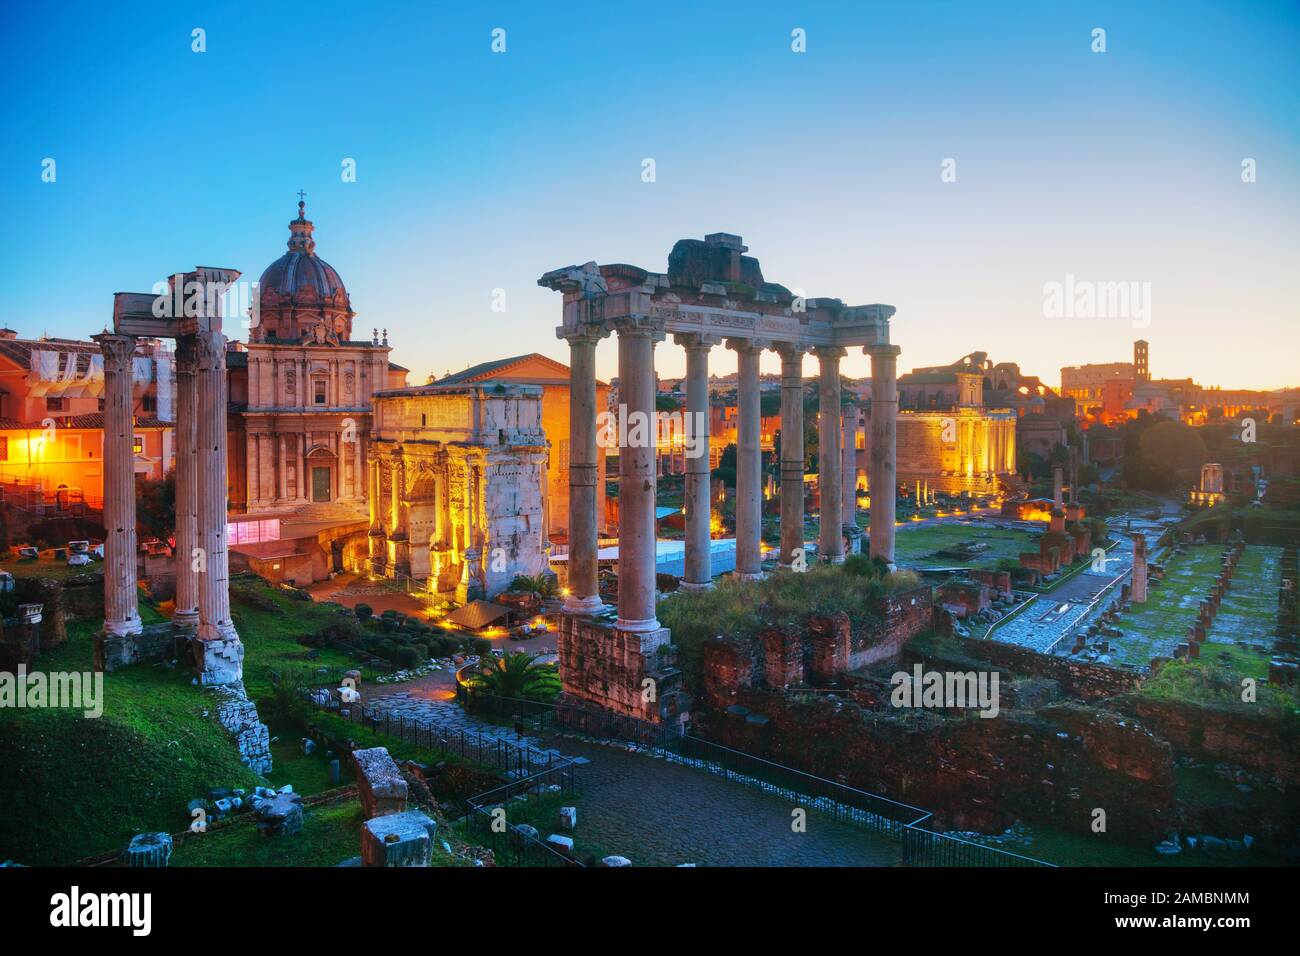 Roman forum ruins at the night time in Rome, Italy Stock Photo